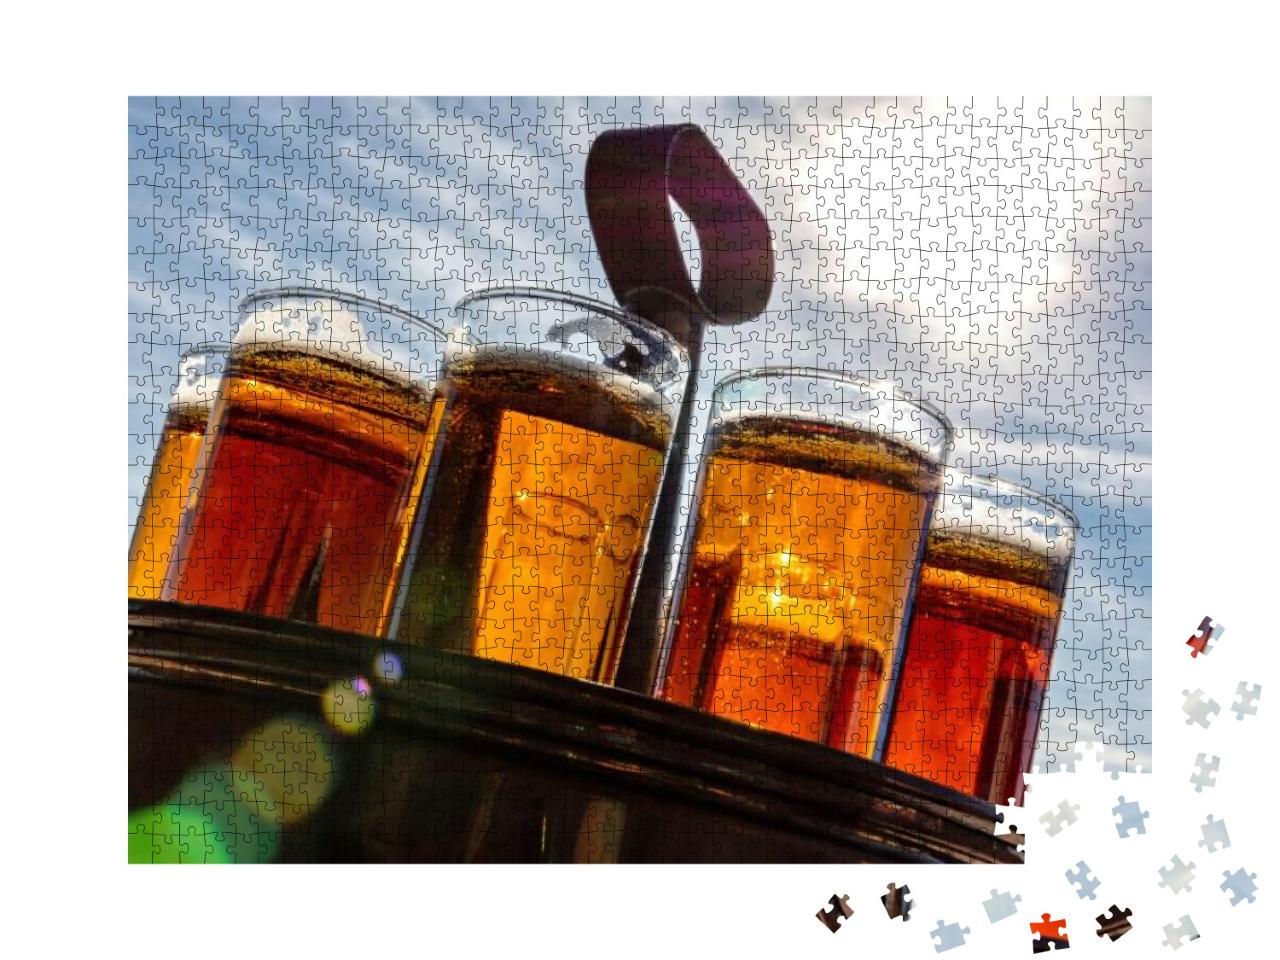 Koelsch - a Specialty Beer from Cologne in a Typical Tray... Jigsaw Puzzle with 1000 pieces